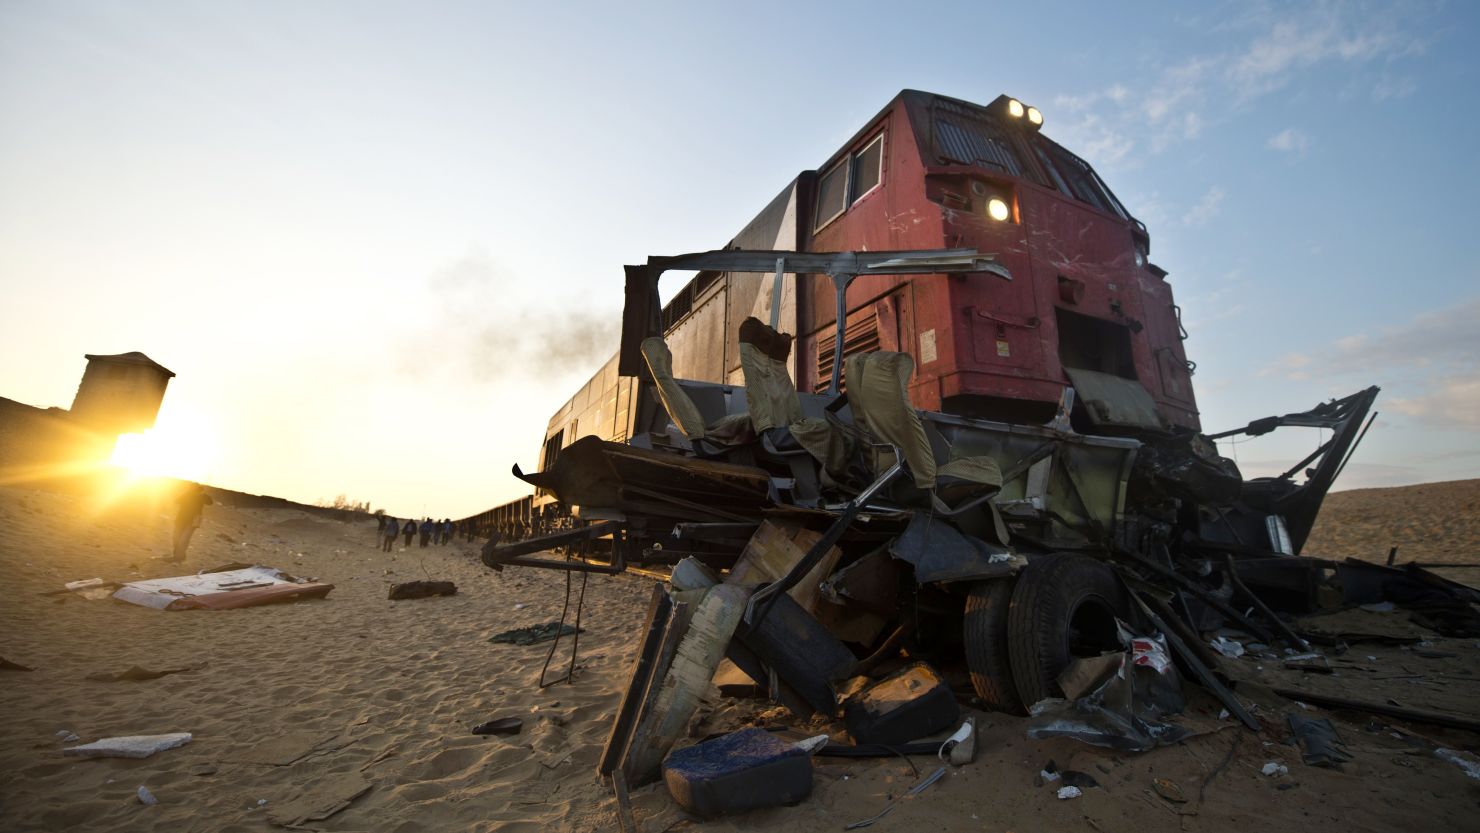 The wreckage of a minibus lies at the site of an accident near a railway crossing in Dahshur, Egypt, on Monday.